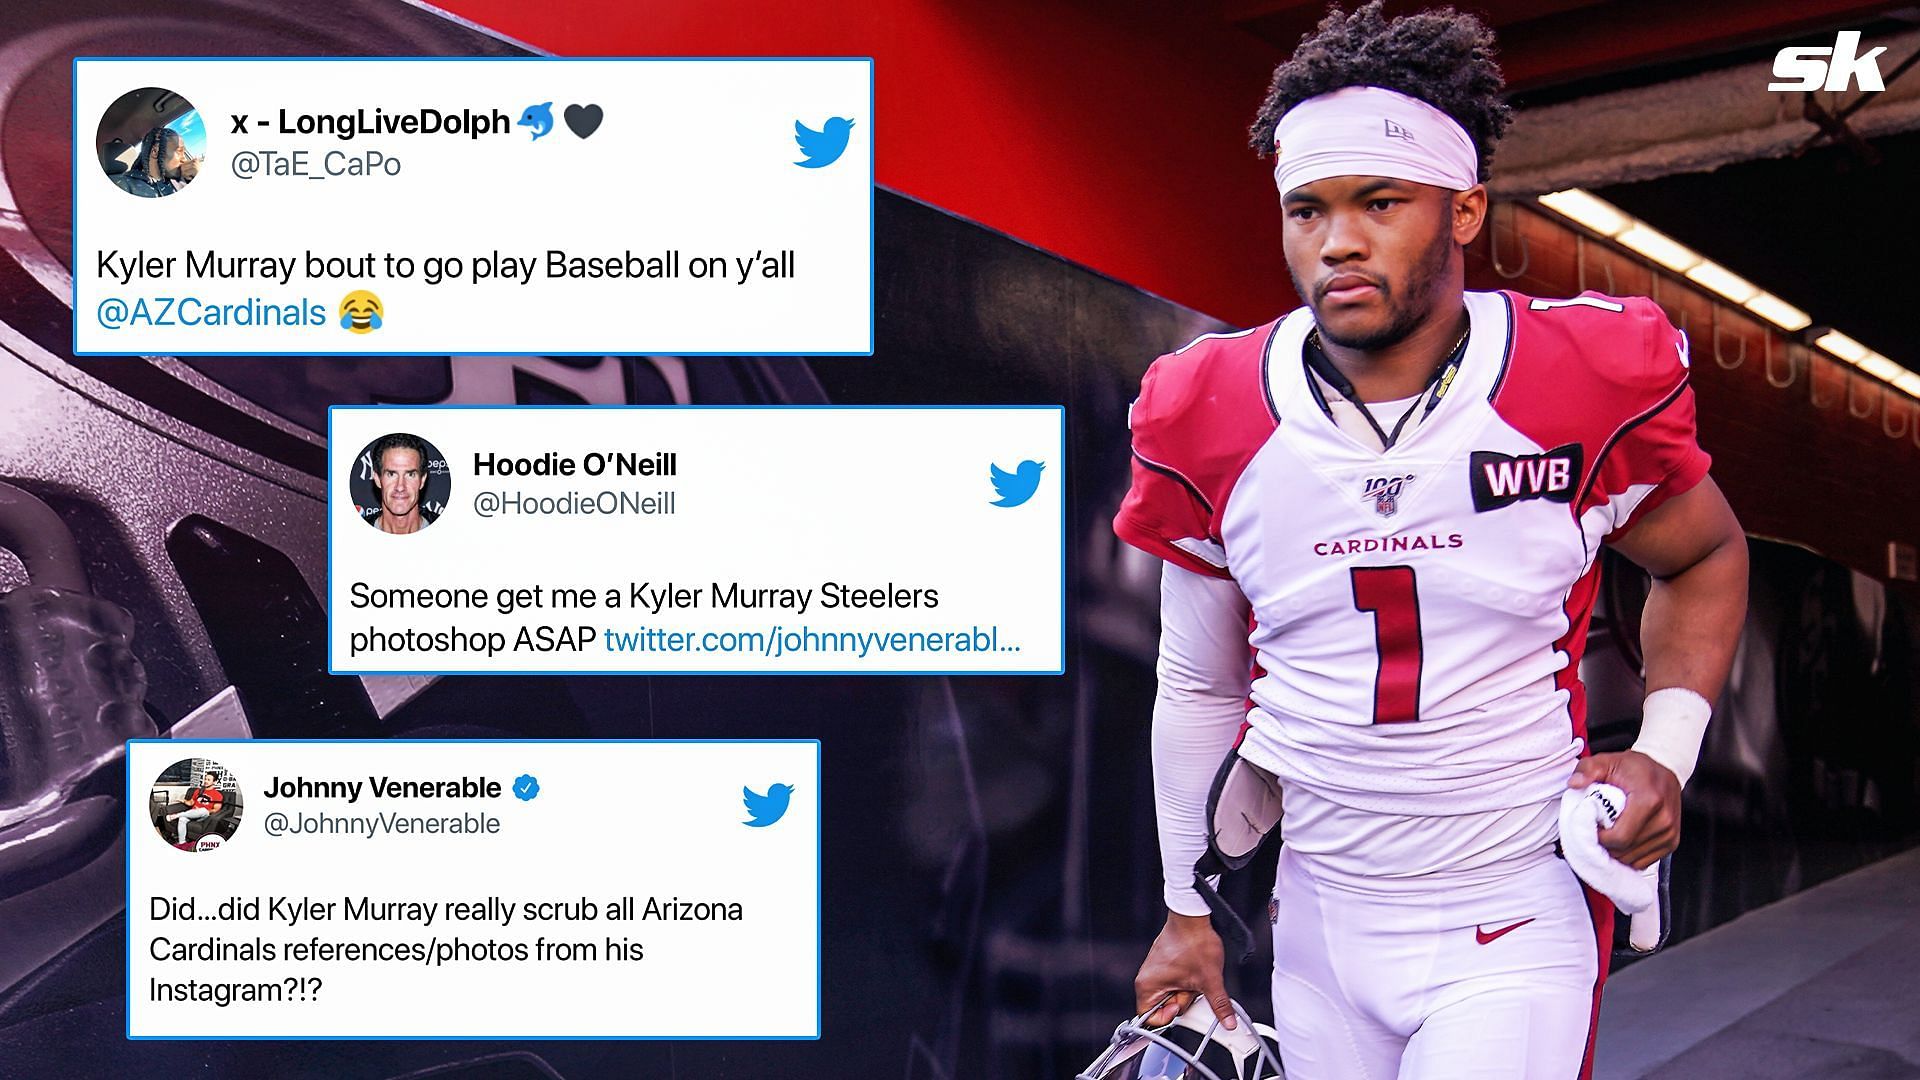 Get me a Kyler Murray Steelers photoshop ASAP' - Fans go berzerk as Kyler  Murray deletes every mention of Cardinals from Instagram profile